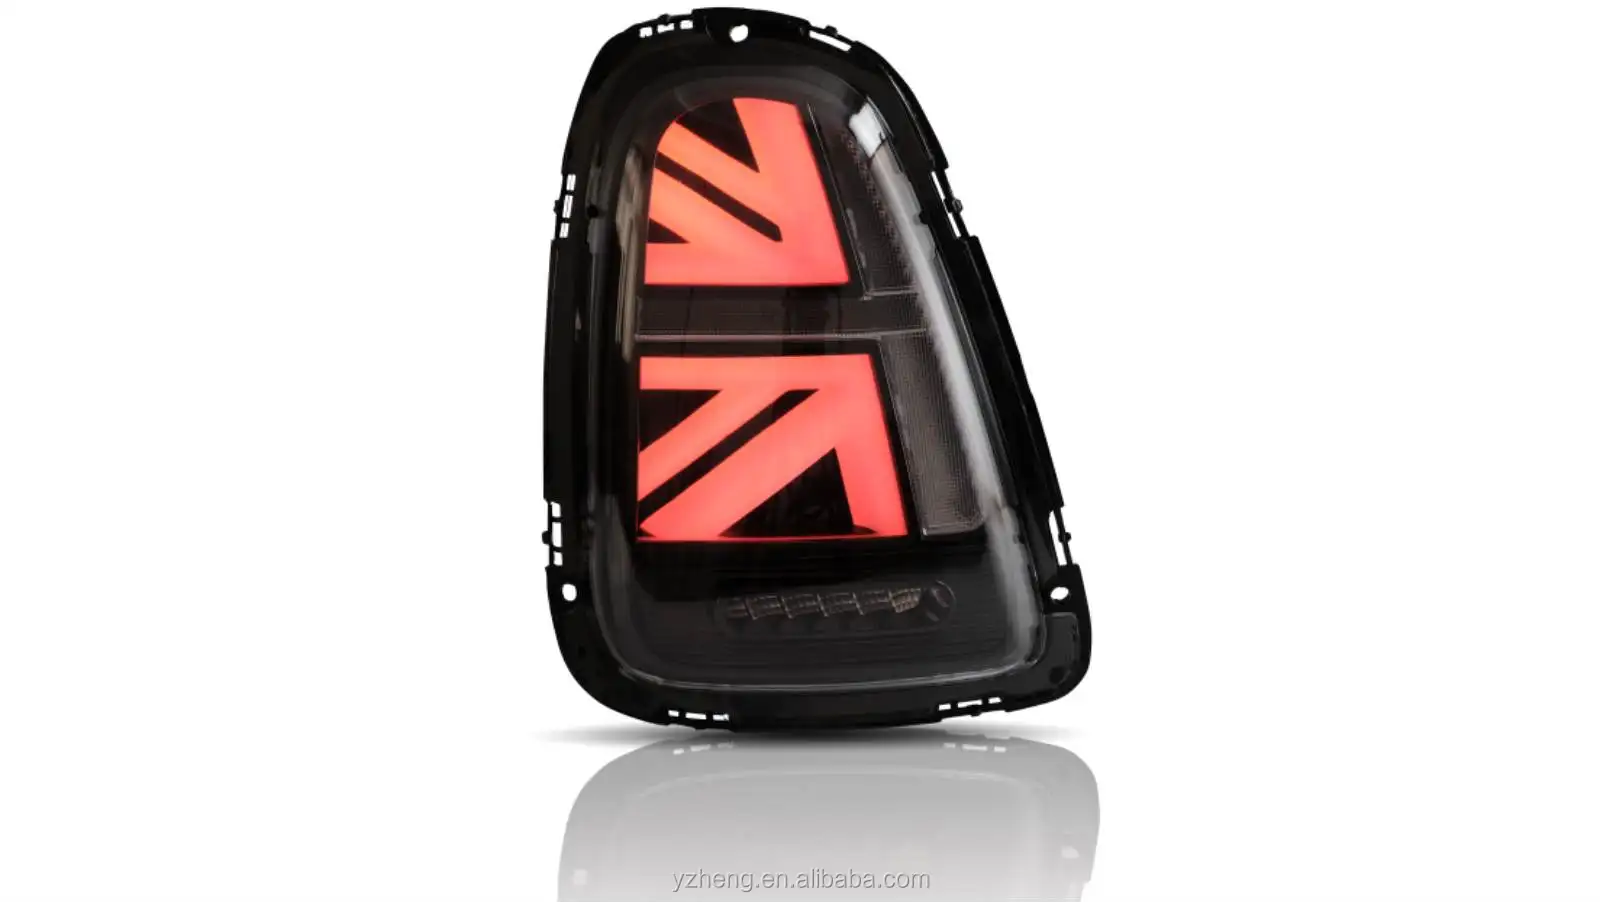 Vland factory for BMW R56 &R58  taillights  2011 2012 2013 LED rear light wholesale price with plug and play